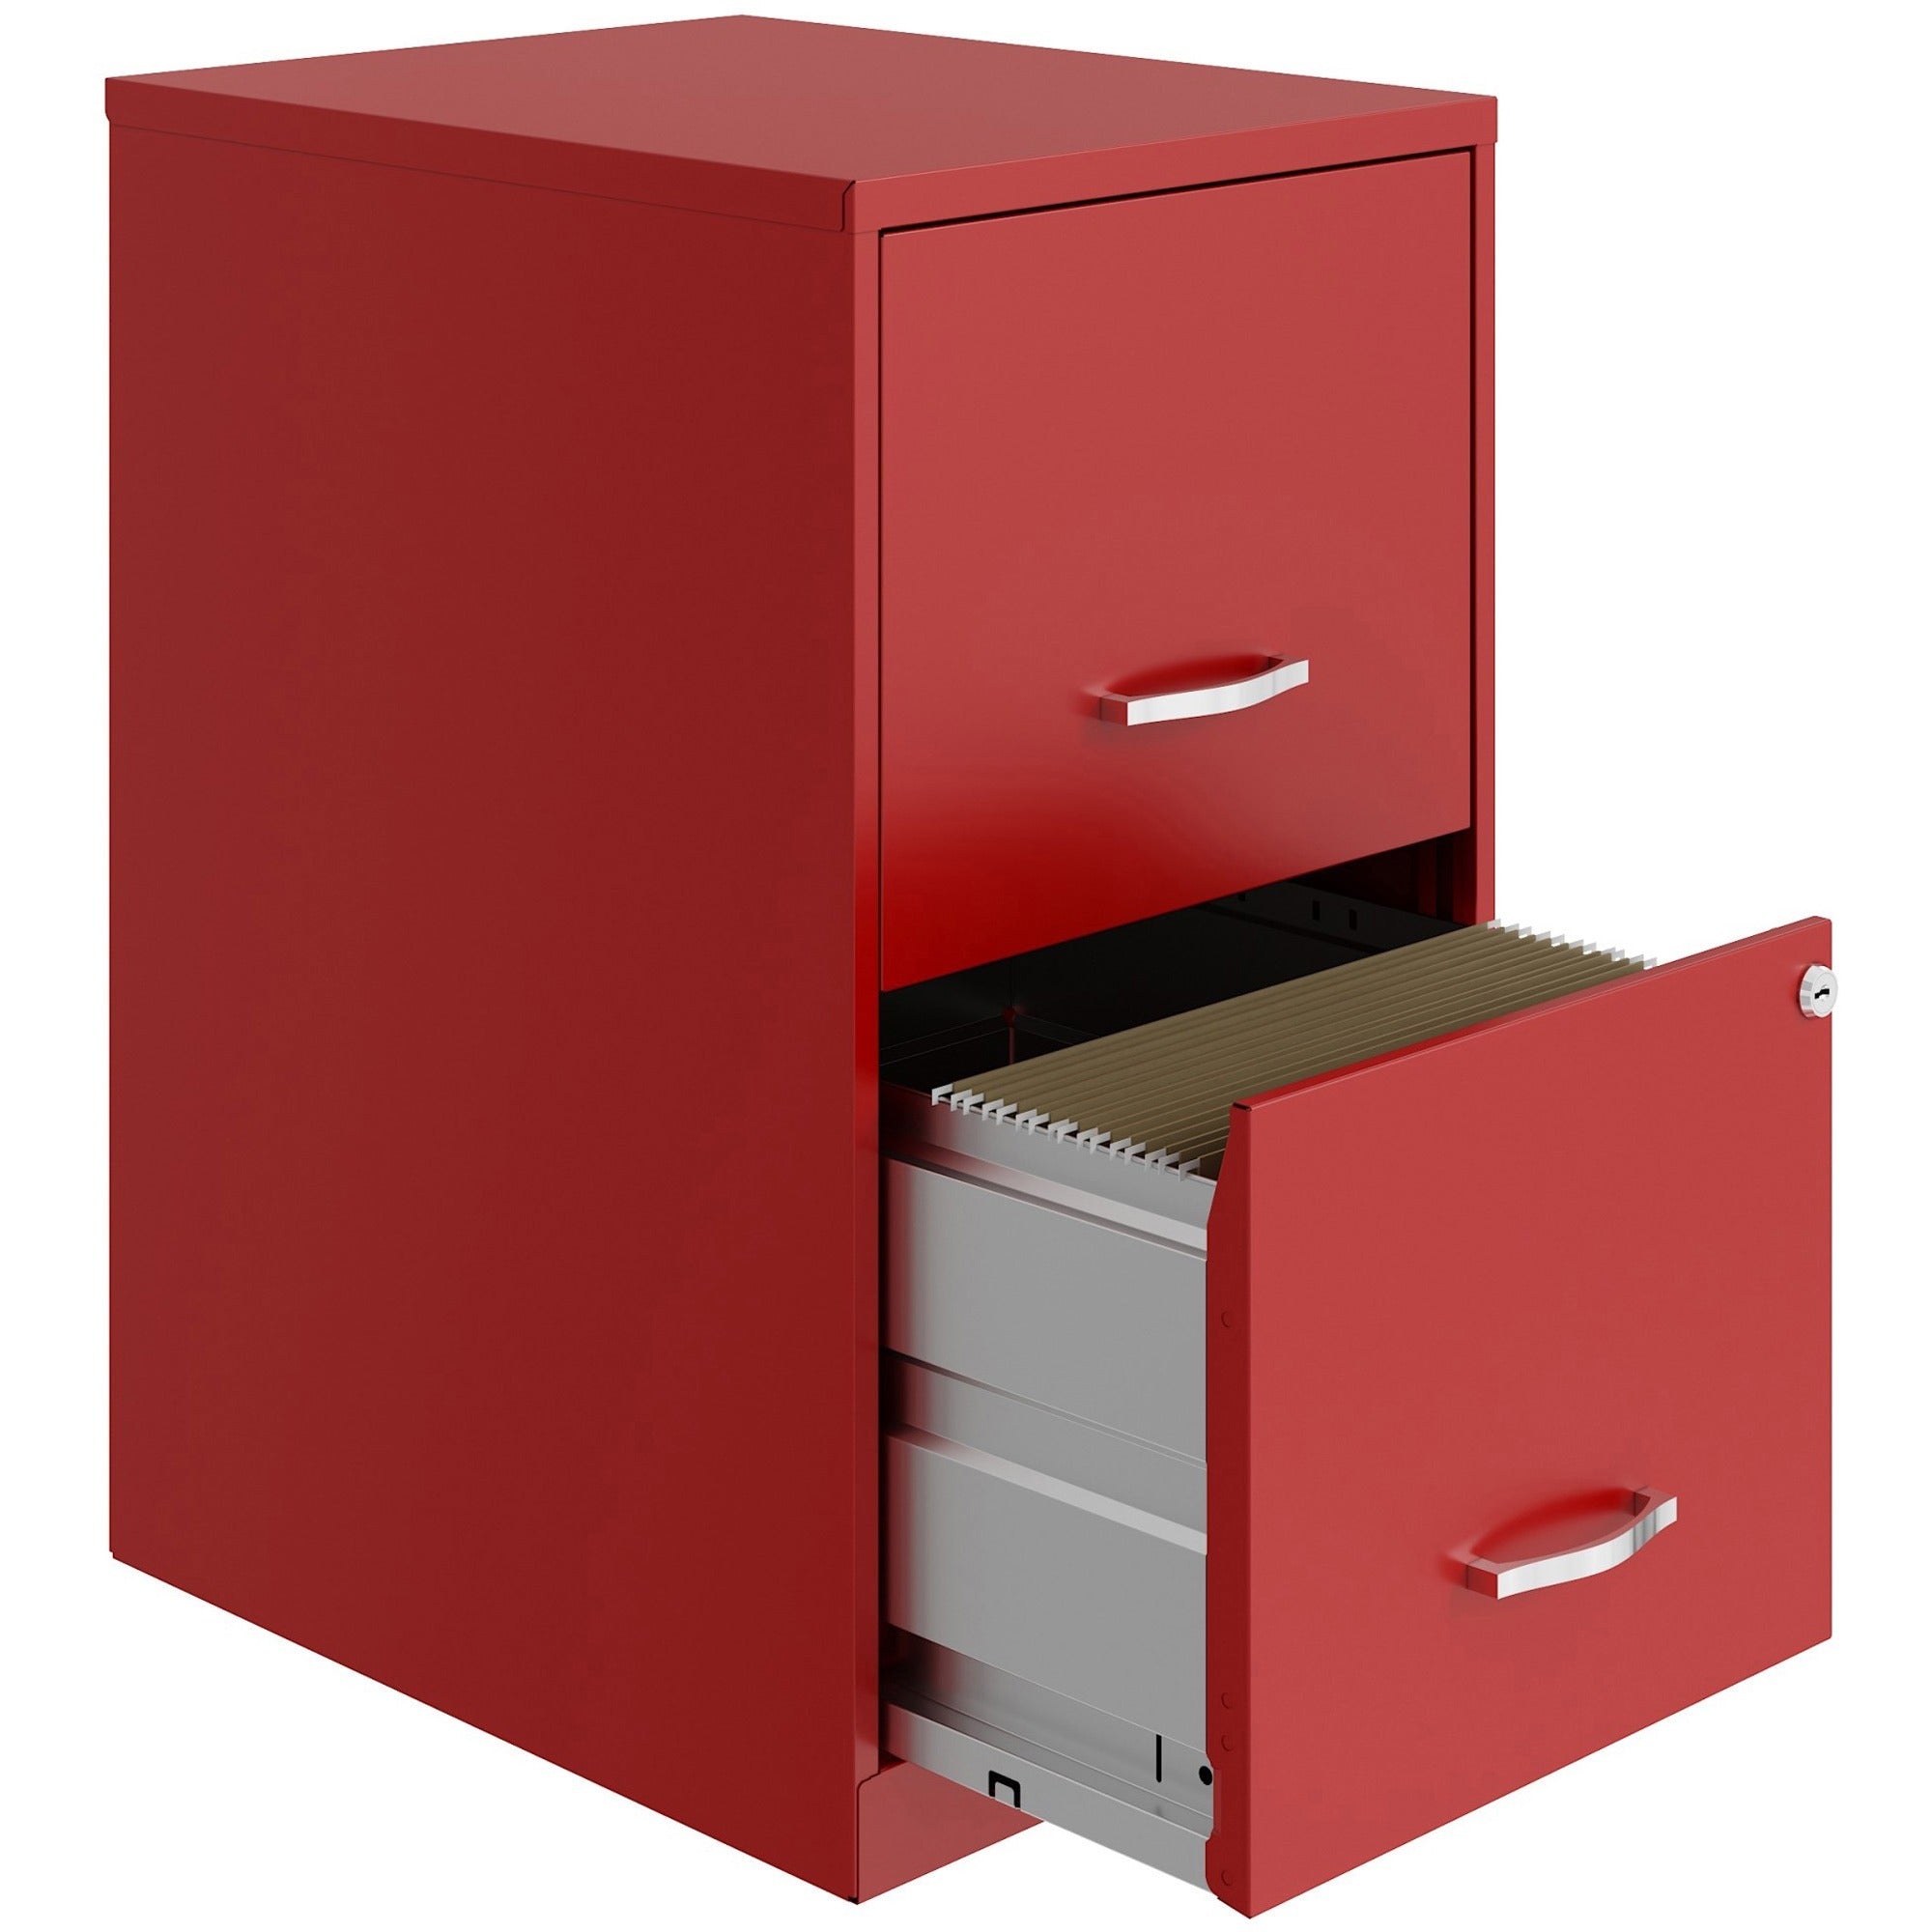 nusparc-file-cabinet-142-x-18-x-245-2-x-drawers-for-file-letter-vertical-locking-drawer-glide-suspension-nonporous-surface-red-baked-enamel-steel-recycled_nprvf218aard - 4